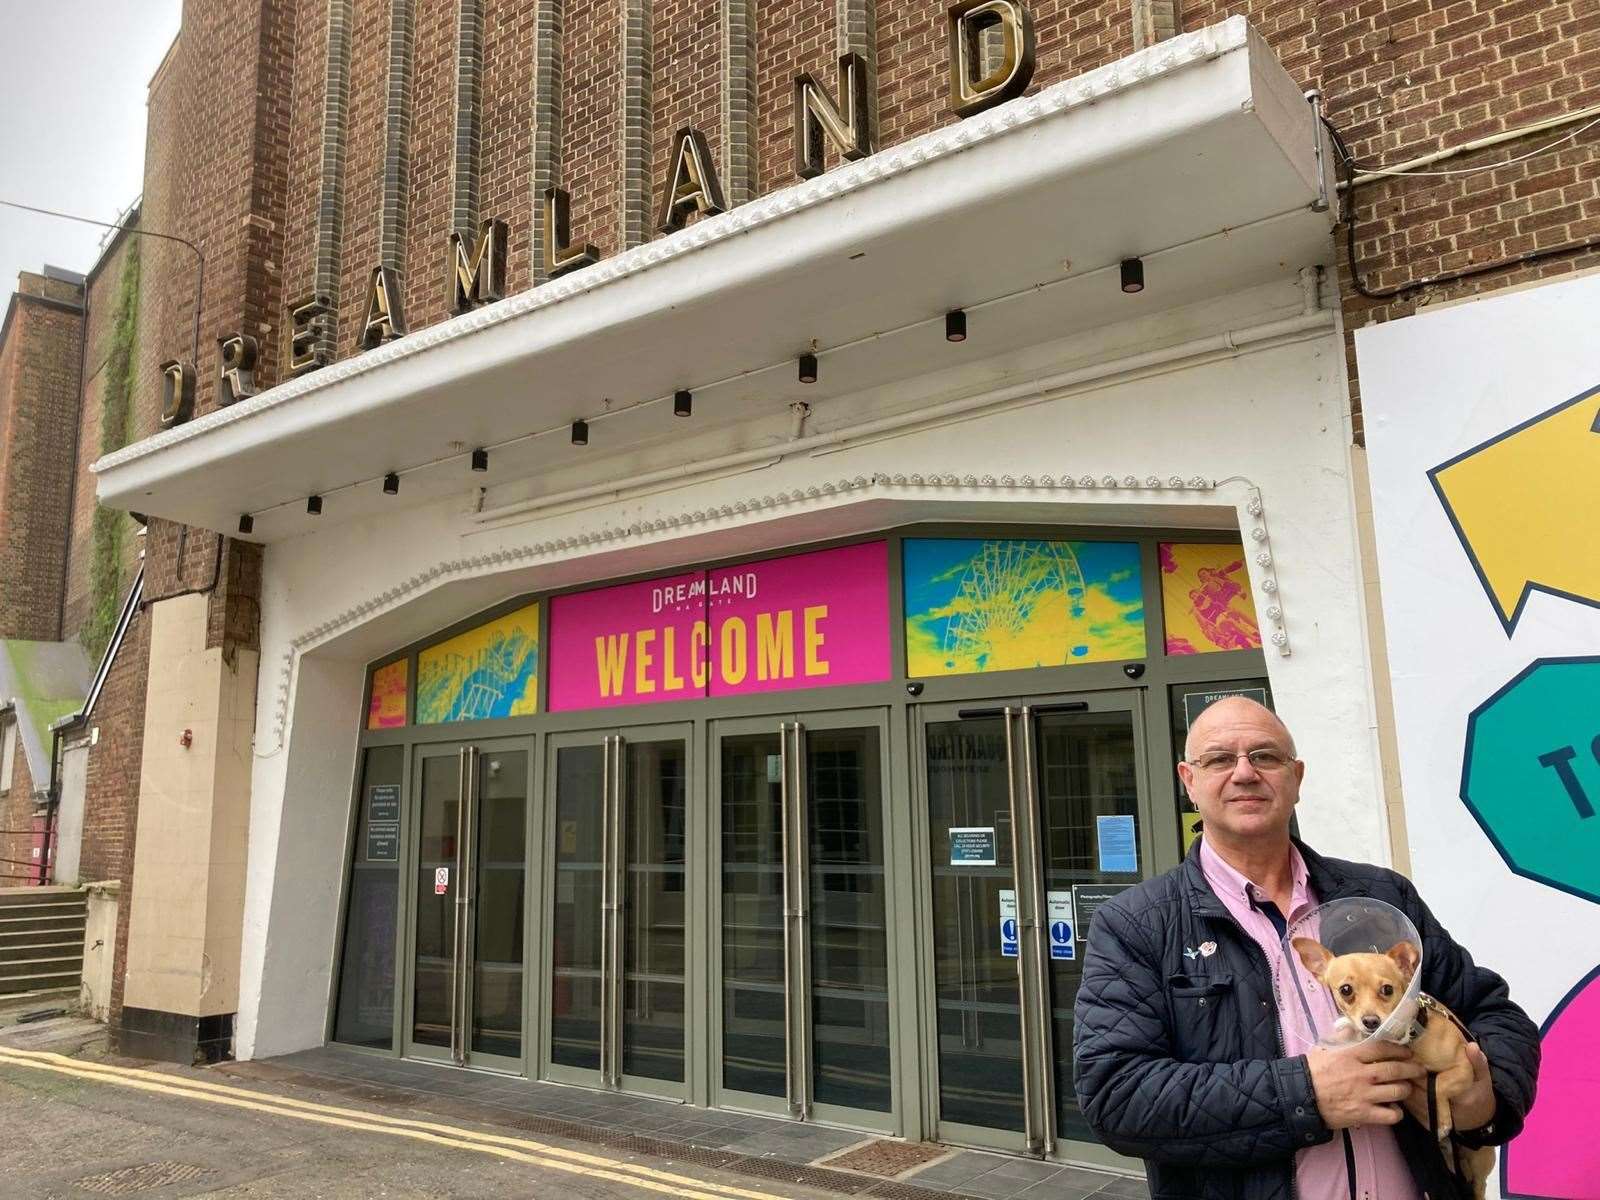 Arlington House resident Lyndon Brand objected to the Dreamland Margate proposal